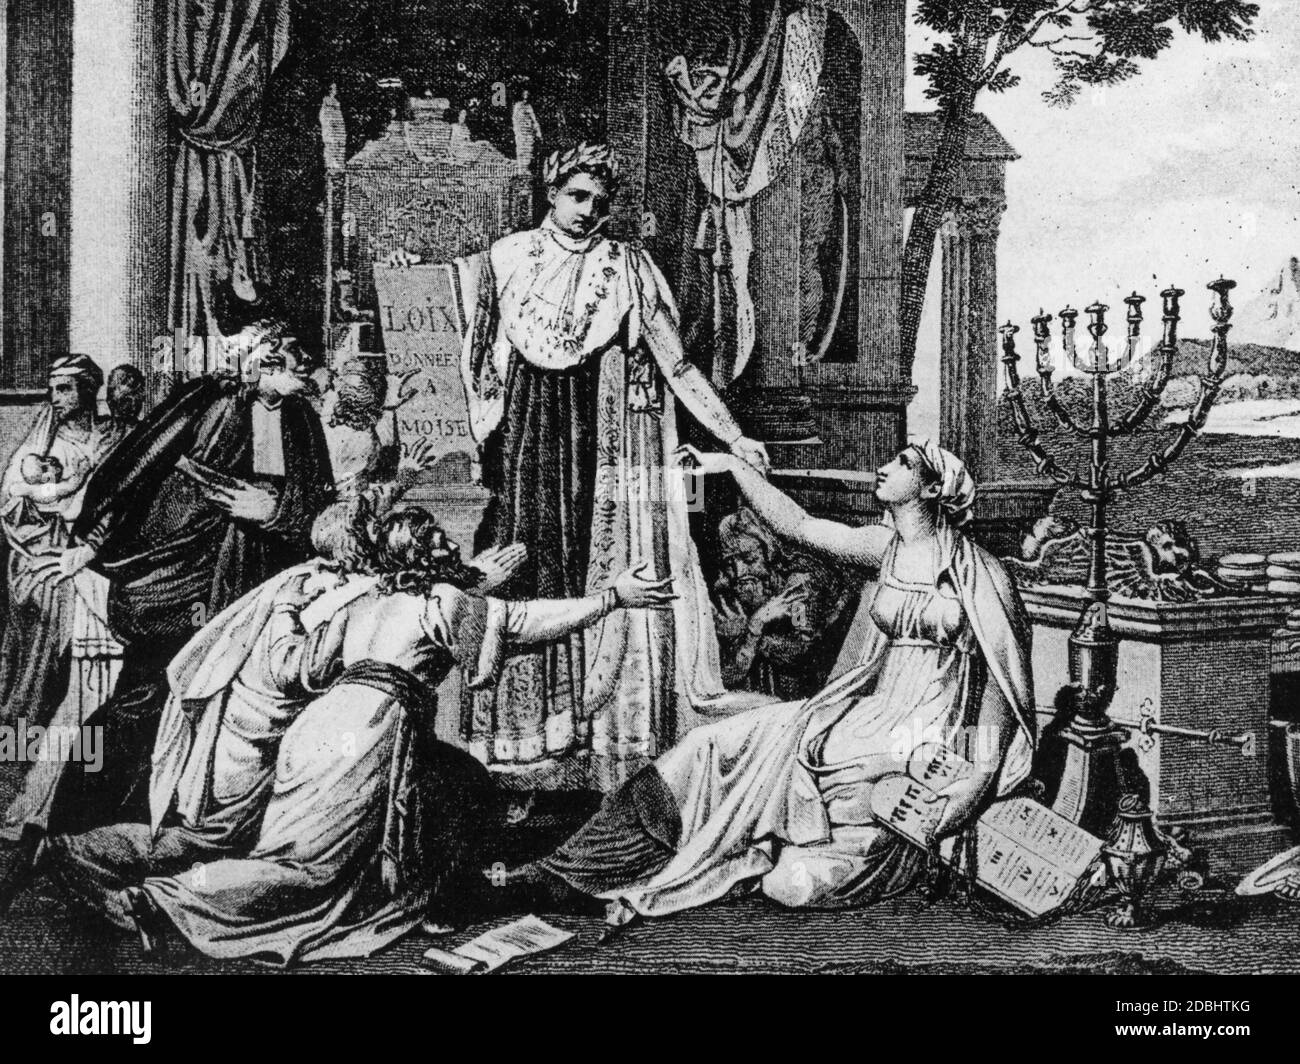 Two years after his coronation as emperor, Napoleon I legalized the right of Jews to practice their religion in France in a legislative act. This was a reaction to the anti-Semitic hate campaigns in France. The picture shows a contemporary engraving, allegorically depicting Napoleon as protector of the Jews. Stock Photo